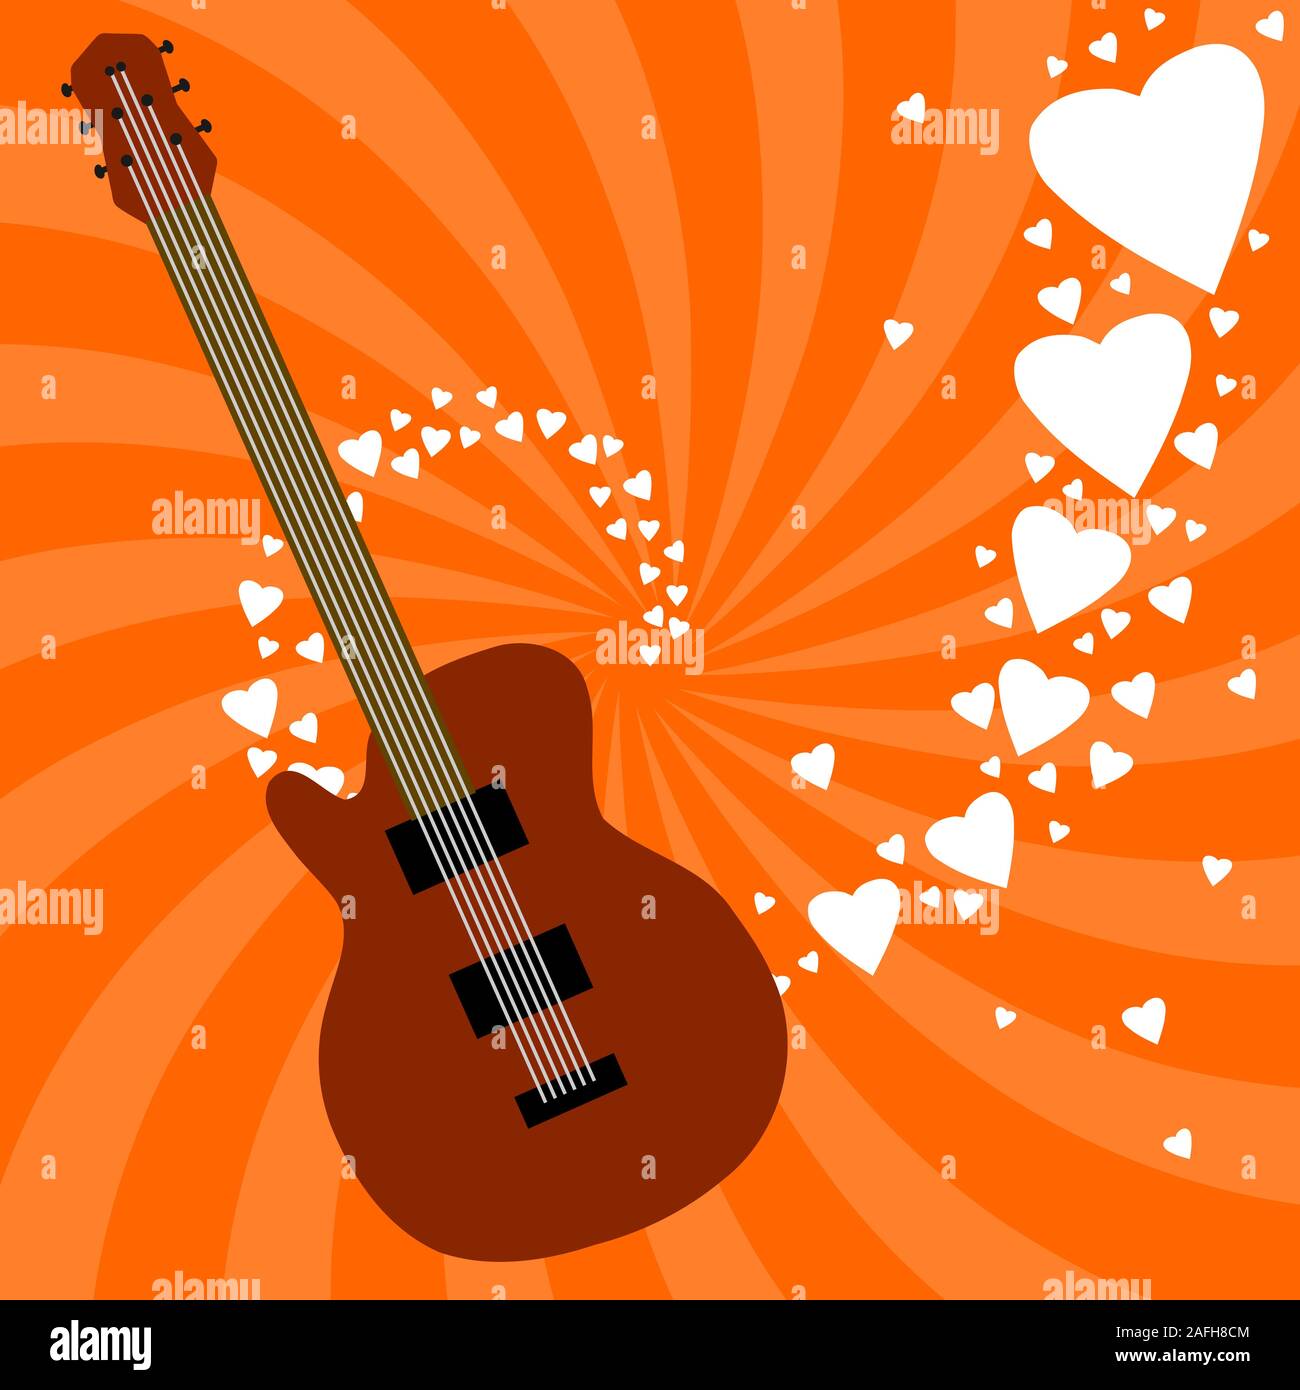 Music Love Theme Electric Guitar Background Illustration Rock Band Concept Stock Vector Image Art Alamy